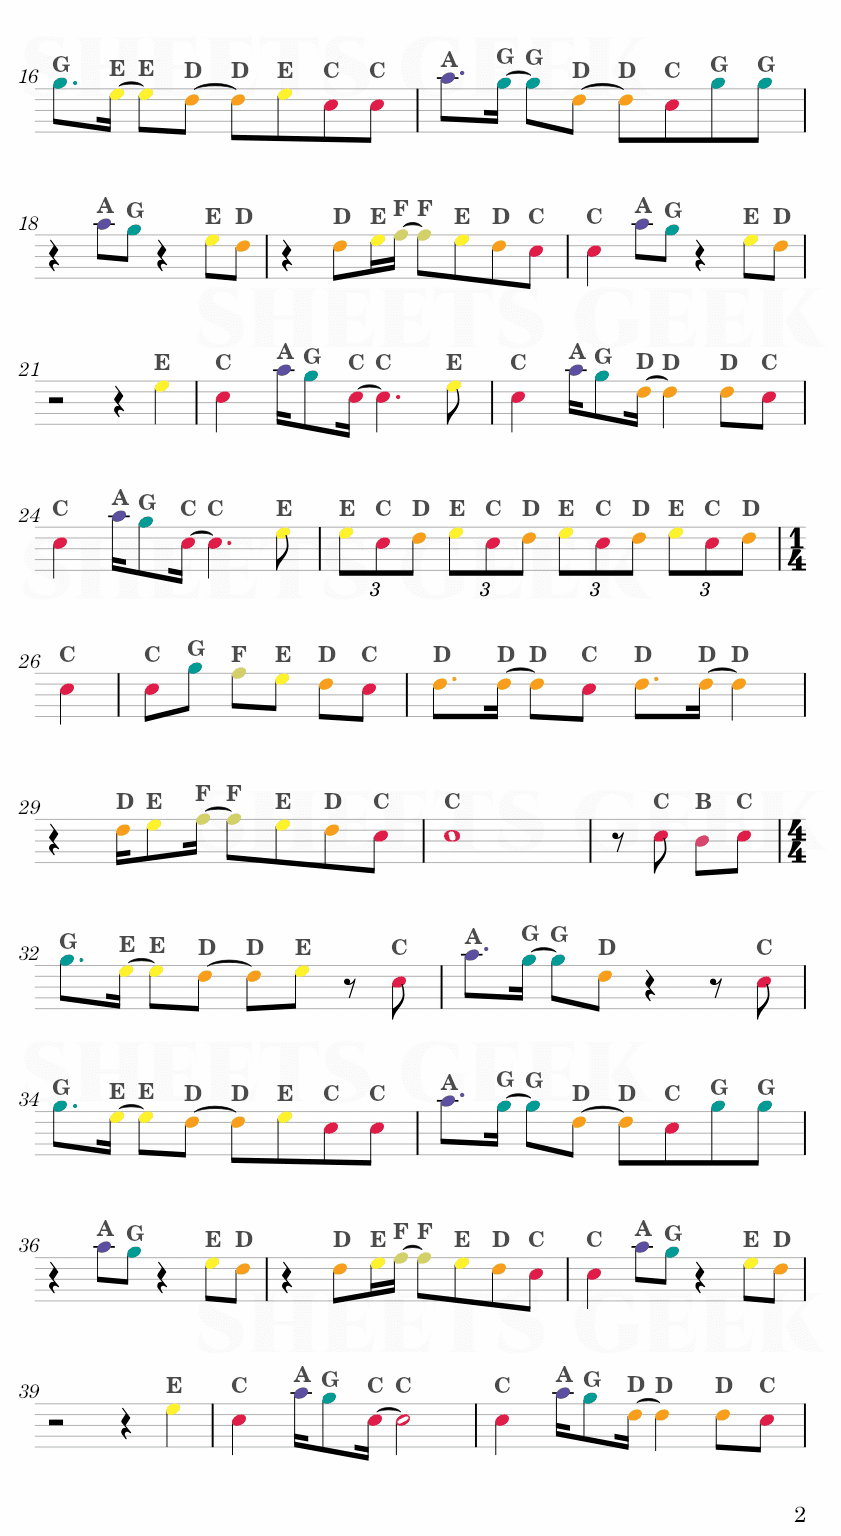 Shelter - Porter Robinson Easy Sheet Music Free for piano, keyboard, flute, violin, sax, cello page 2